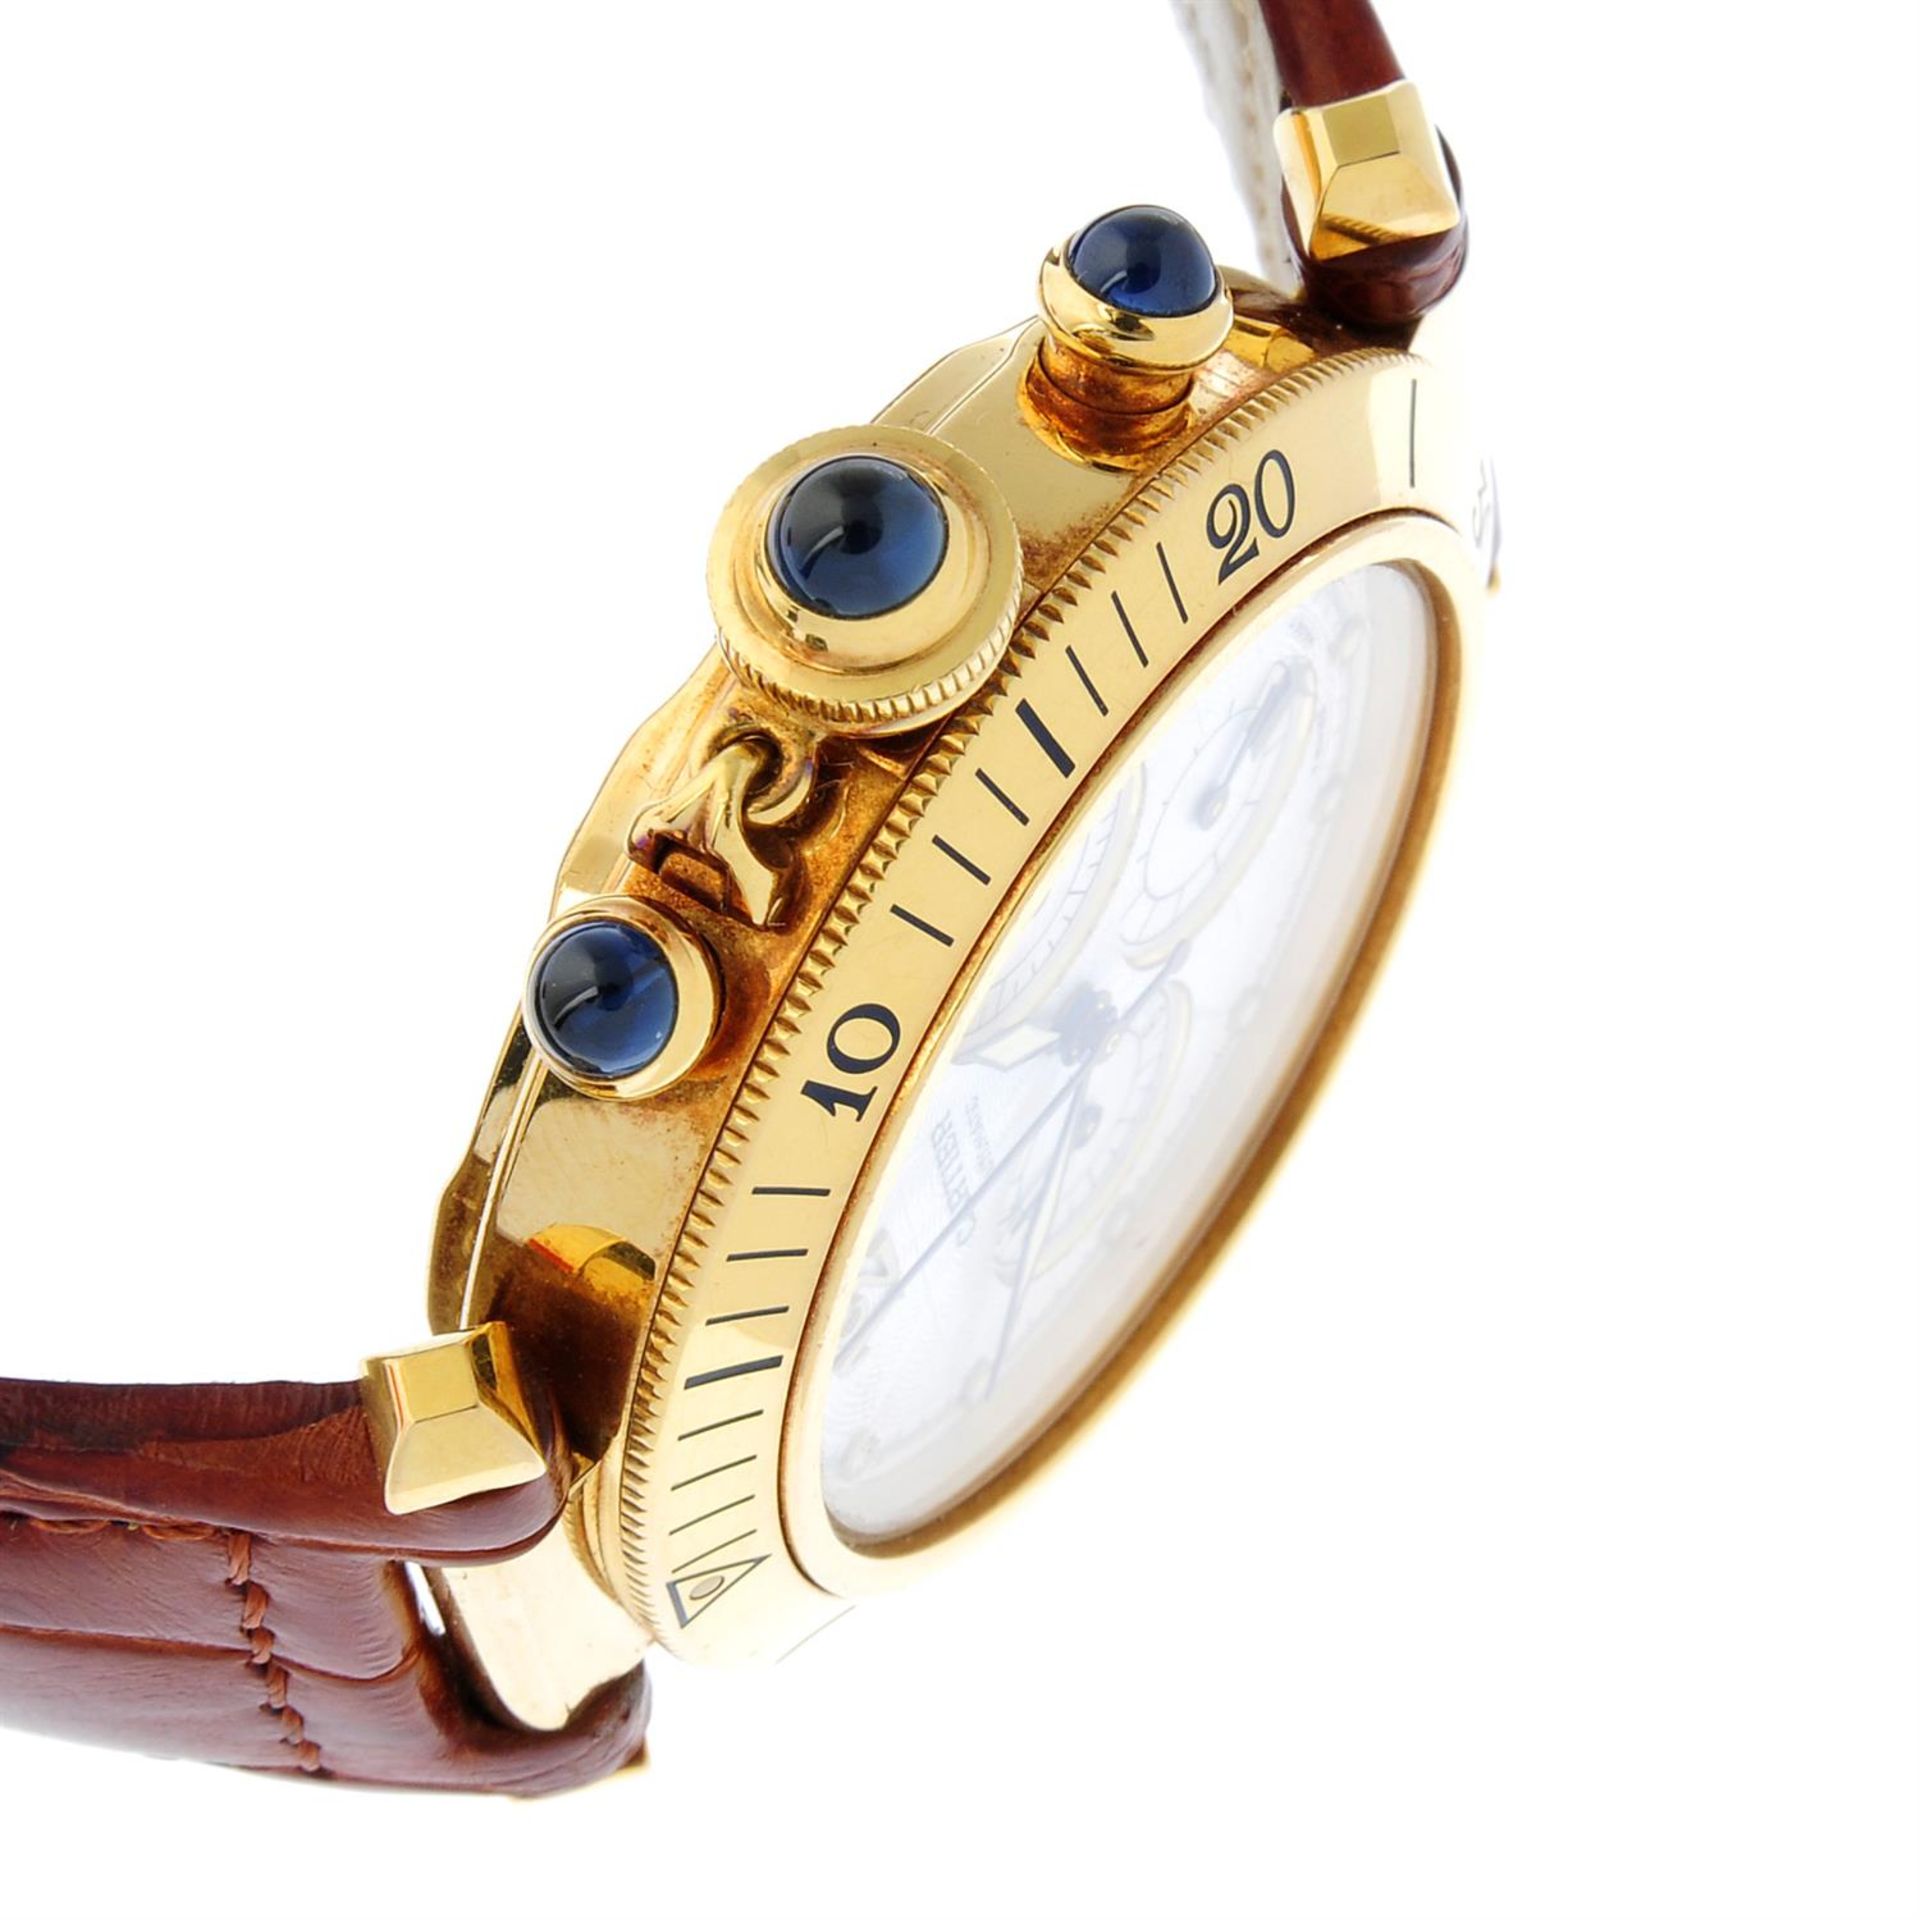 CARTIER - an 18ct yellow gold Pasha chronograph wrist watch, 38mm. - Image 3 of 6